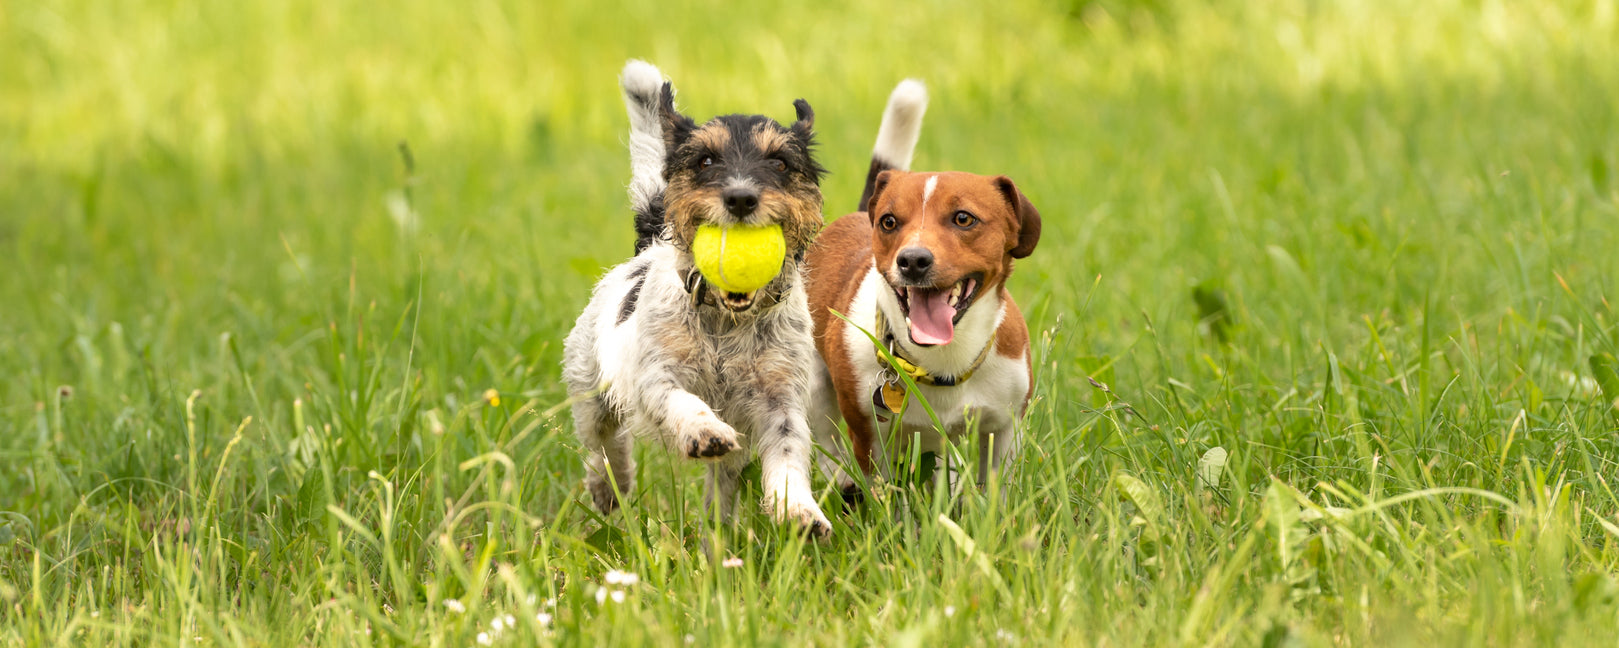 Dogs running outside with a ball | Paw.com